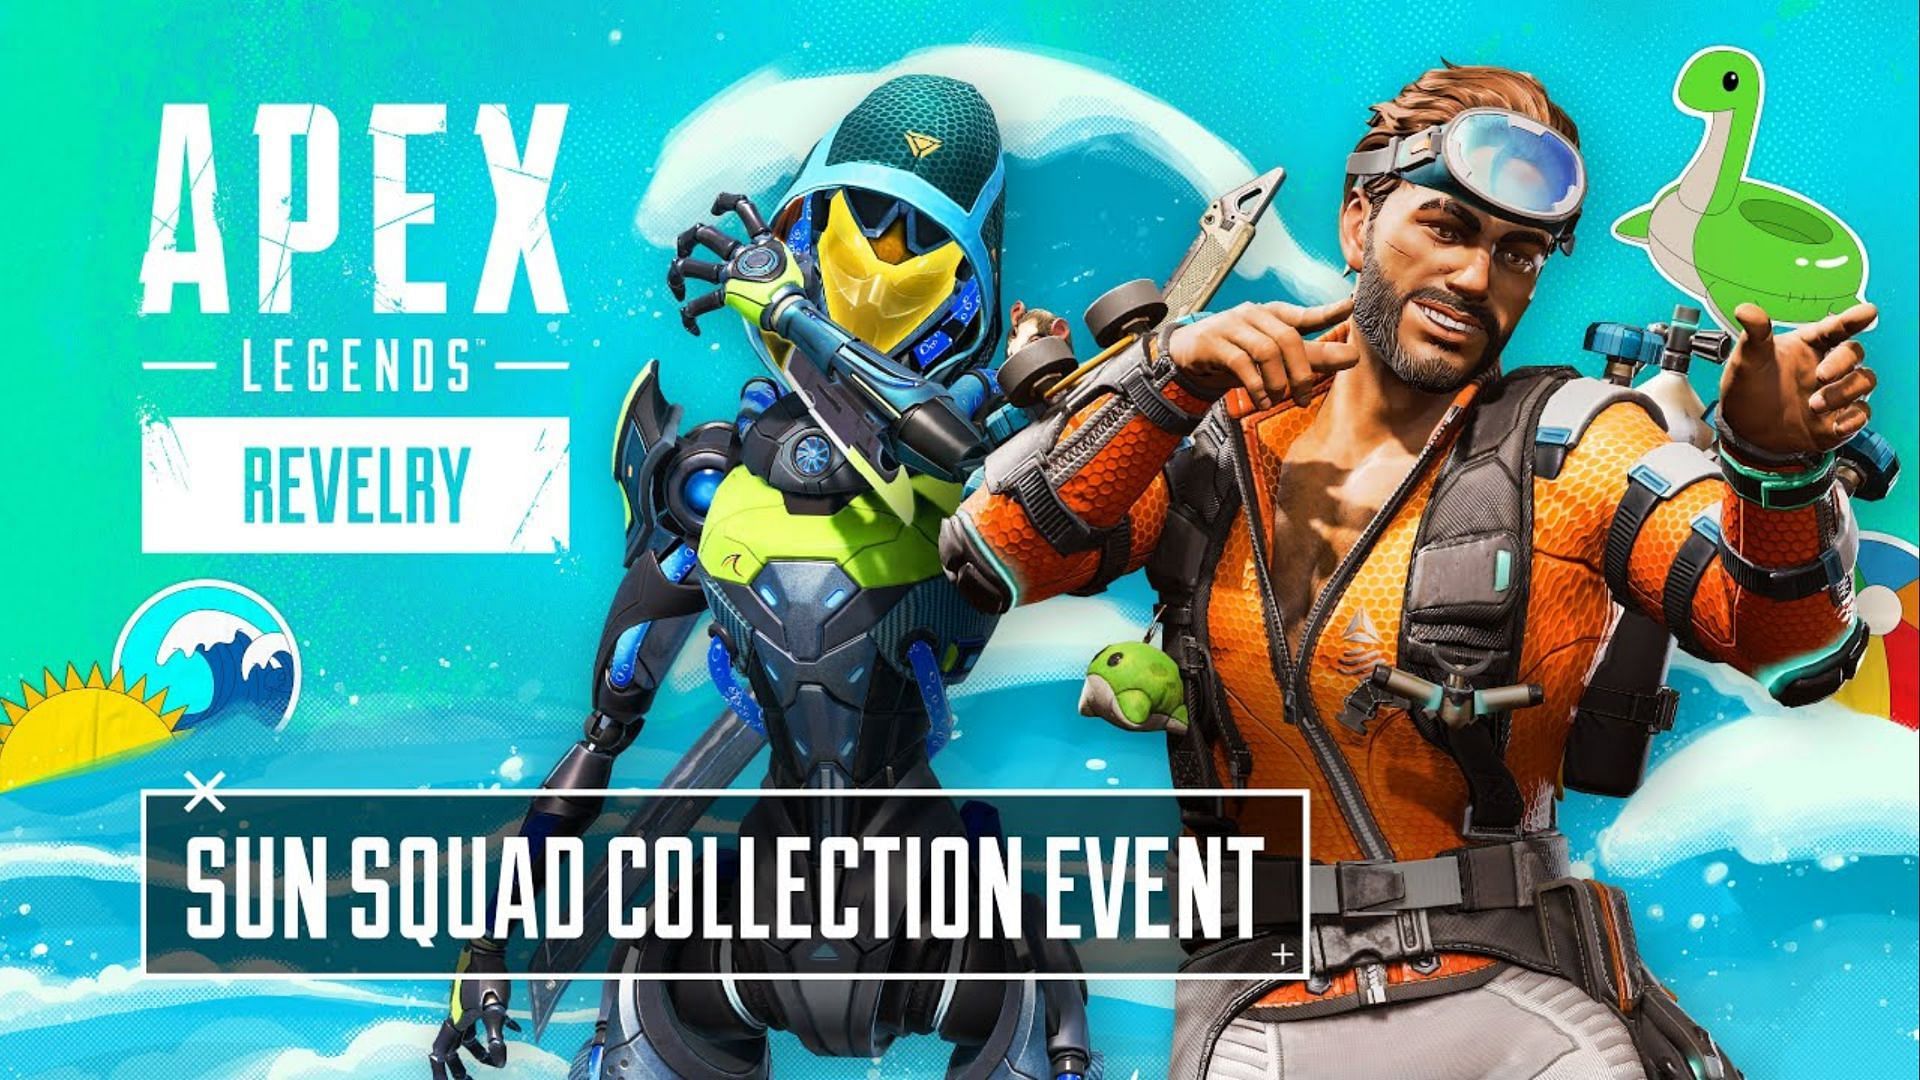 Not sure if its been posted already but here are the new anniversary event  skins compared to their counterparts  rapexlegends